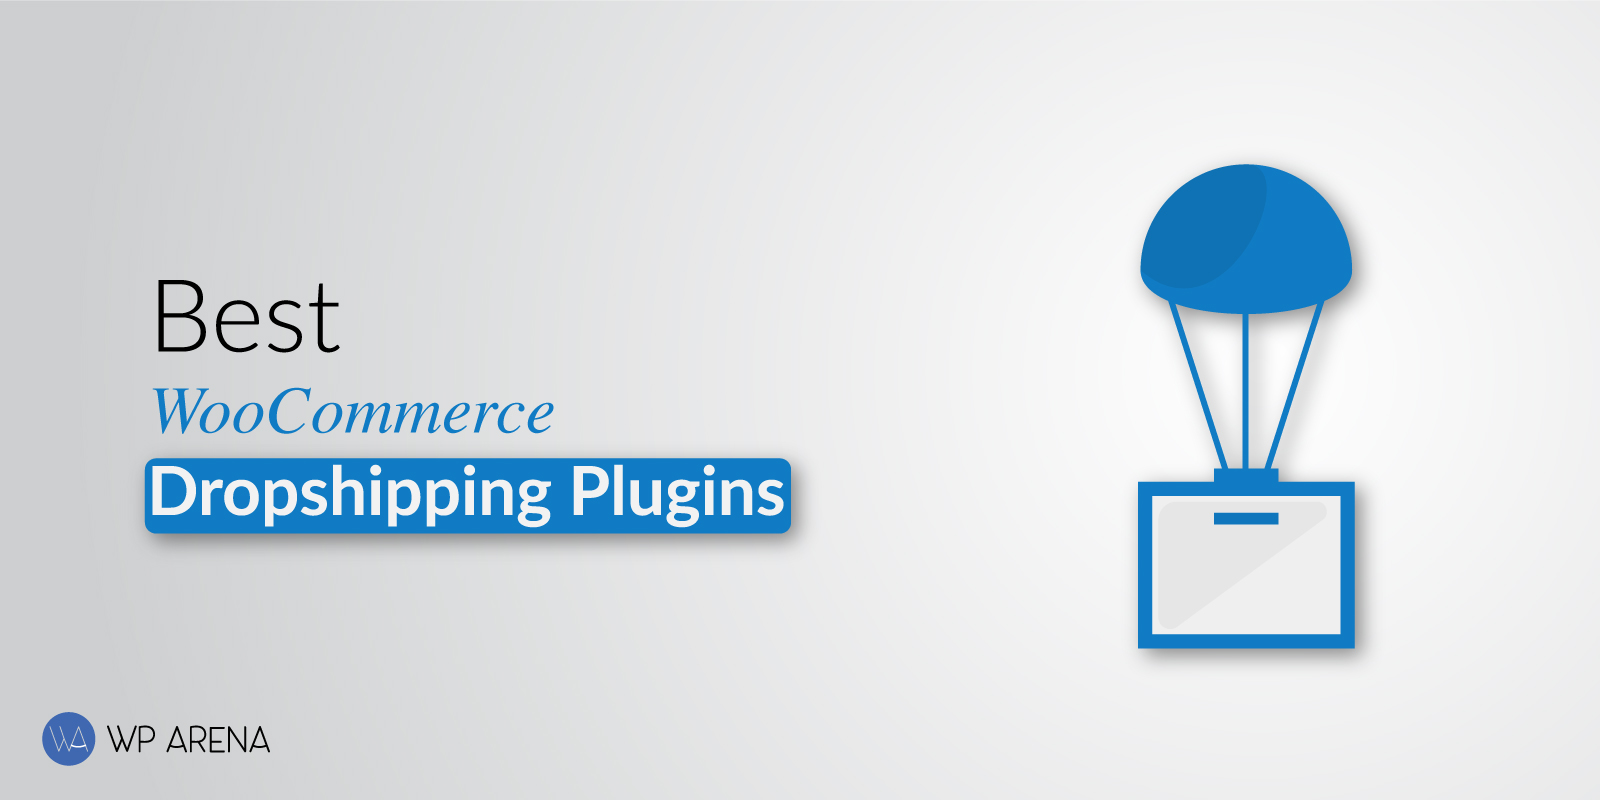 Best woocommerce plugins for dropshipping